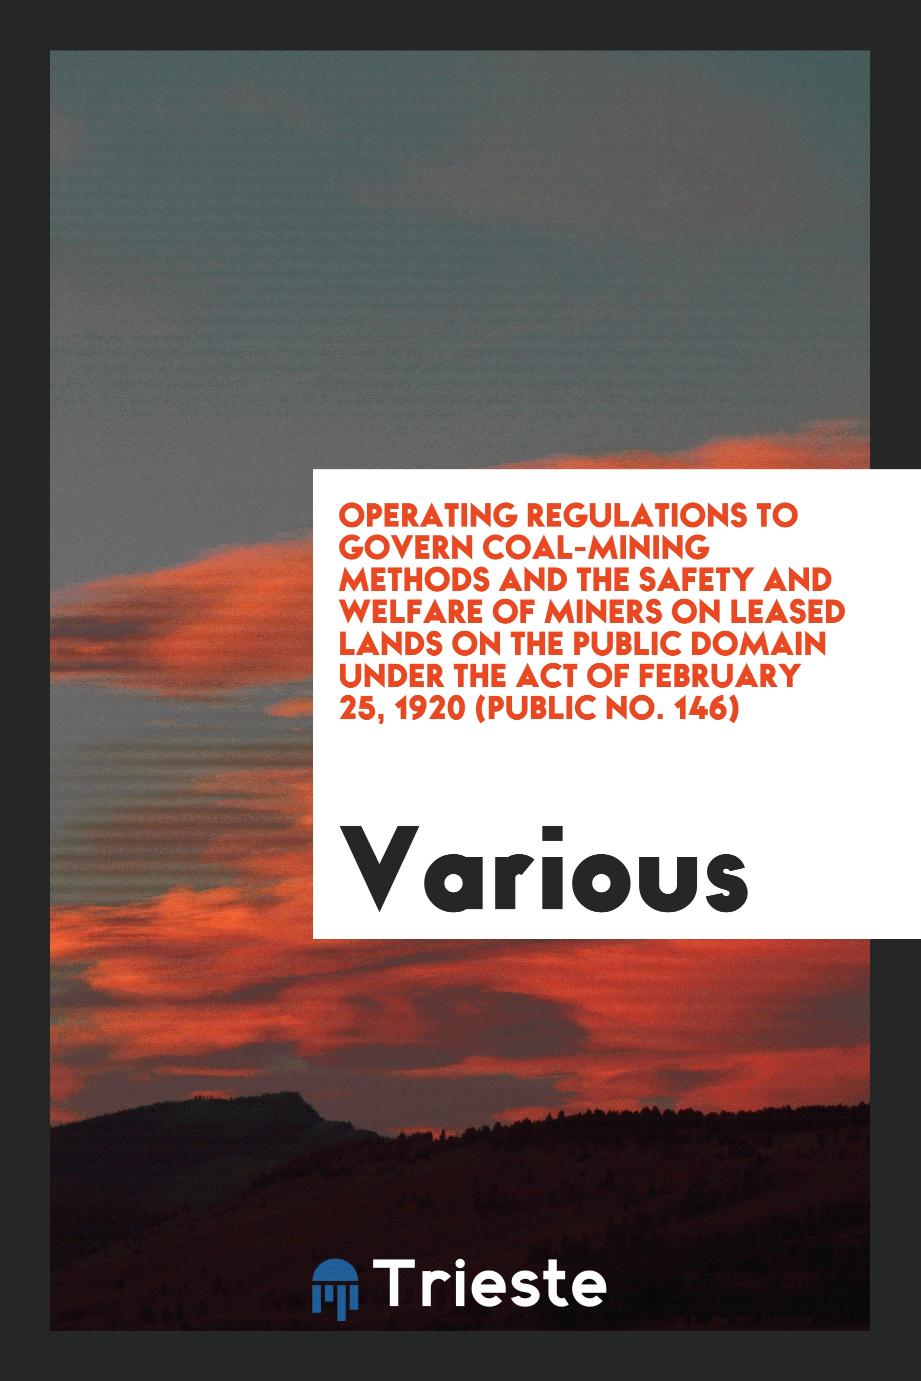 Operating regulations to govern coal-mining methods and the safety and welfare of miners on leased lands on the public domain under the Act of February 25, 1920 (Public No. 146)